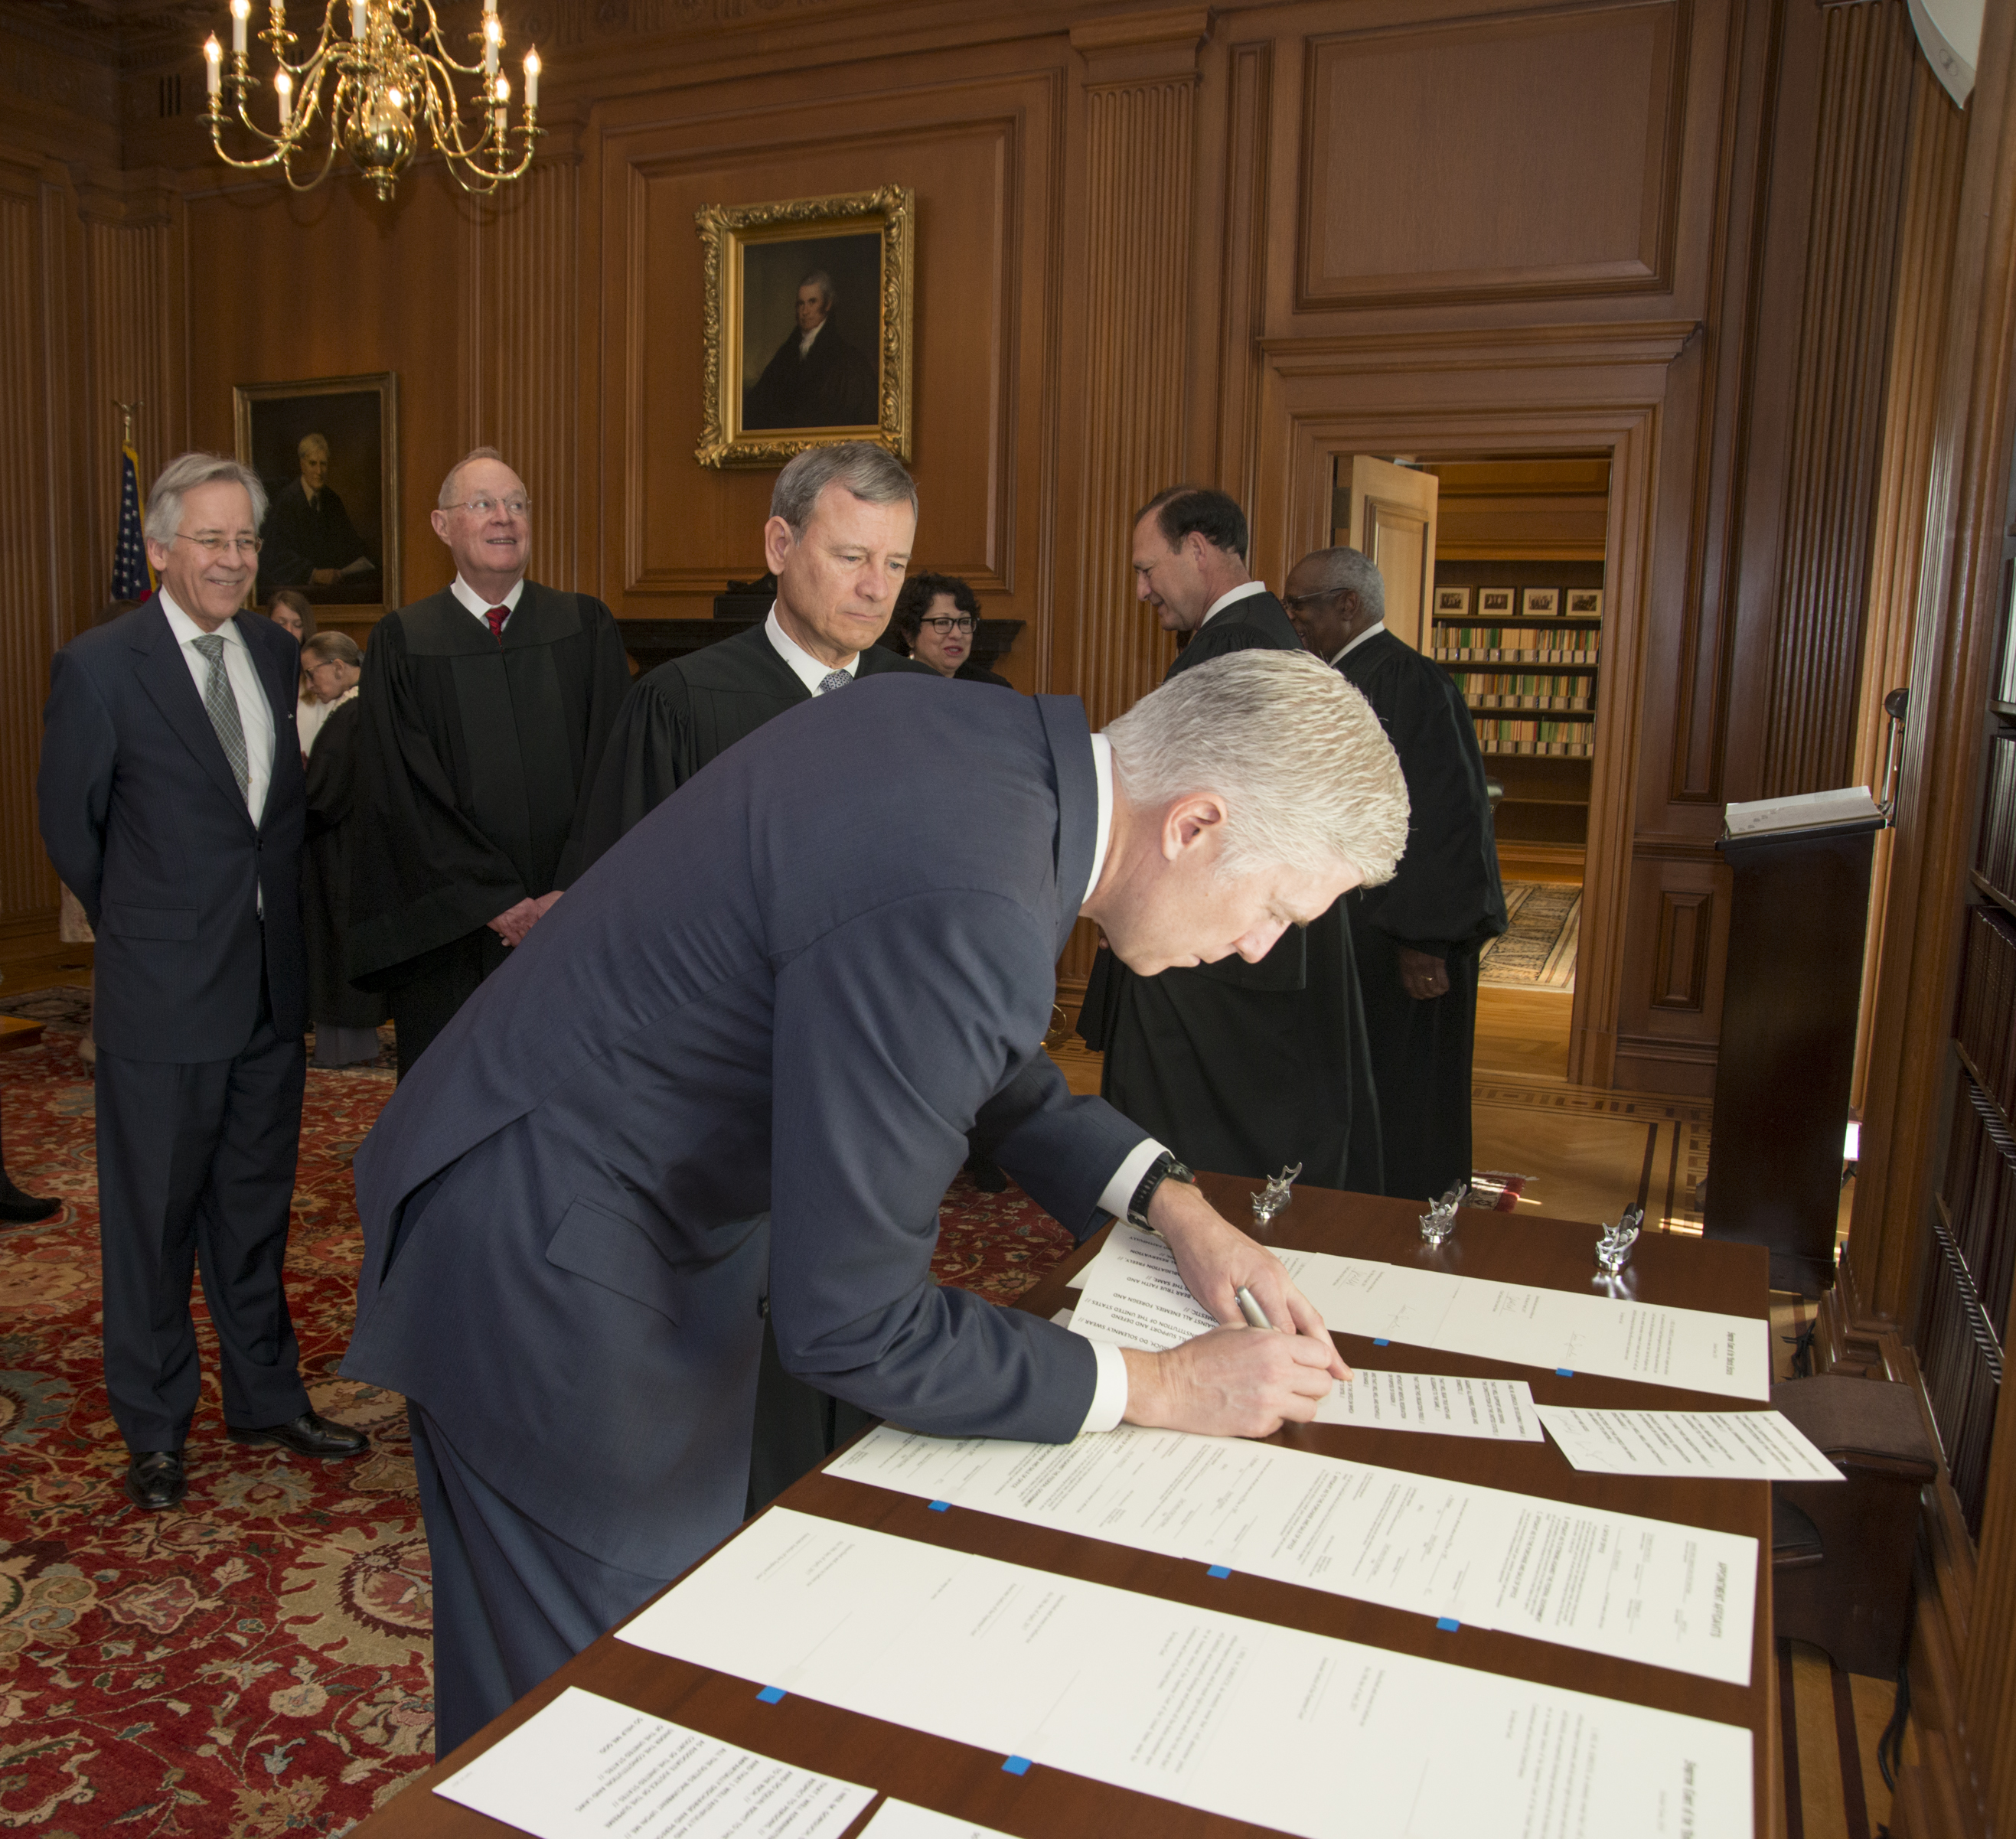 Judge Neil Gorsuch takes constitutional oath at Supreme Court SCOTUSblog